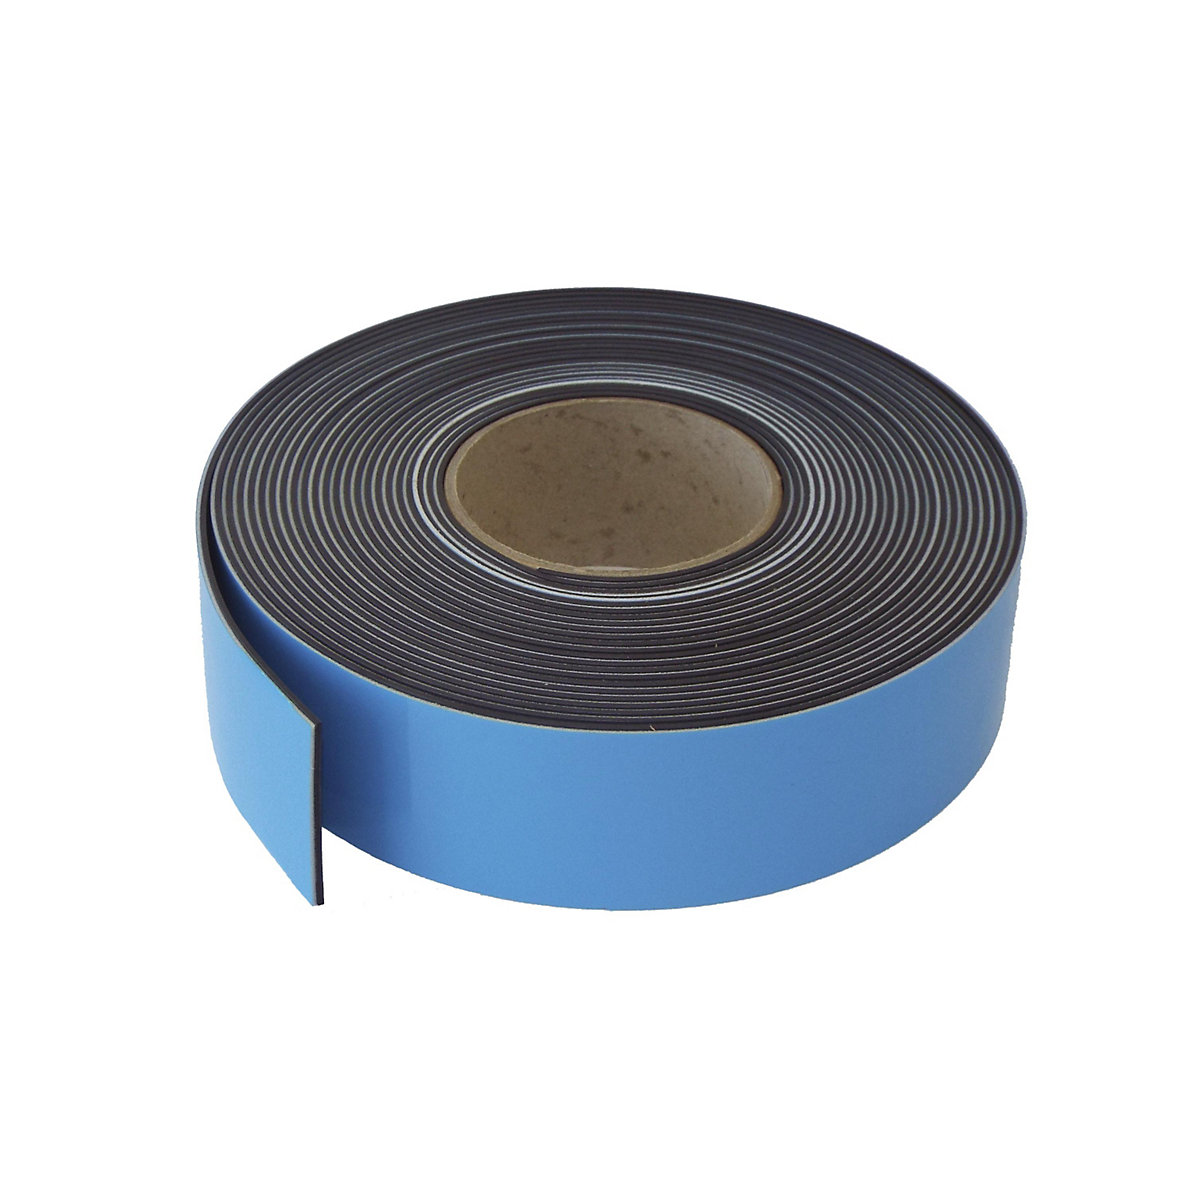 Magnetic strip, self-adhesive, 1.5 mm thick, 1 roll, width 50 mm-3